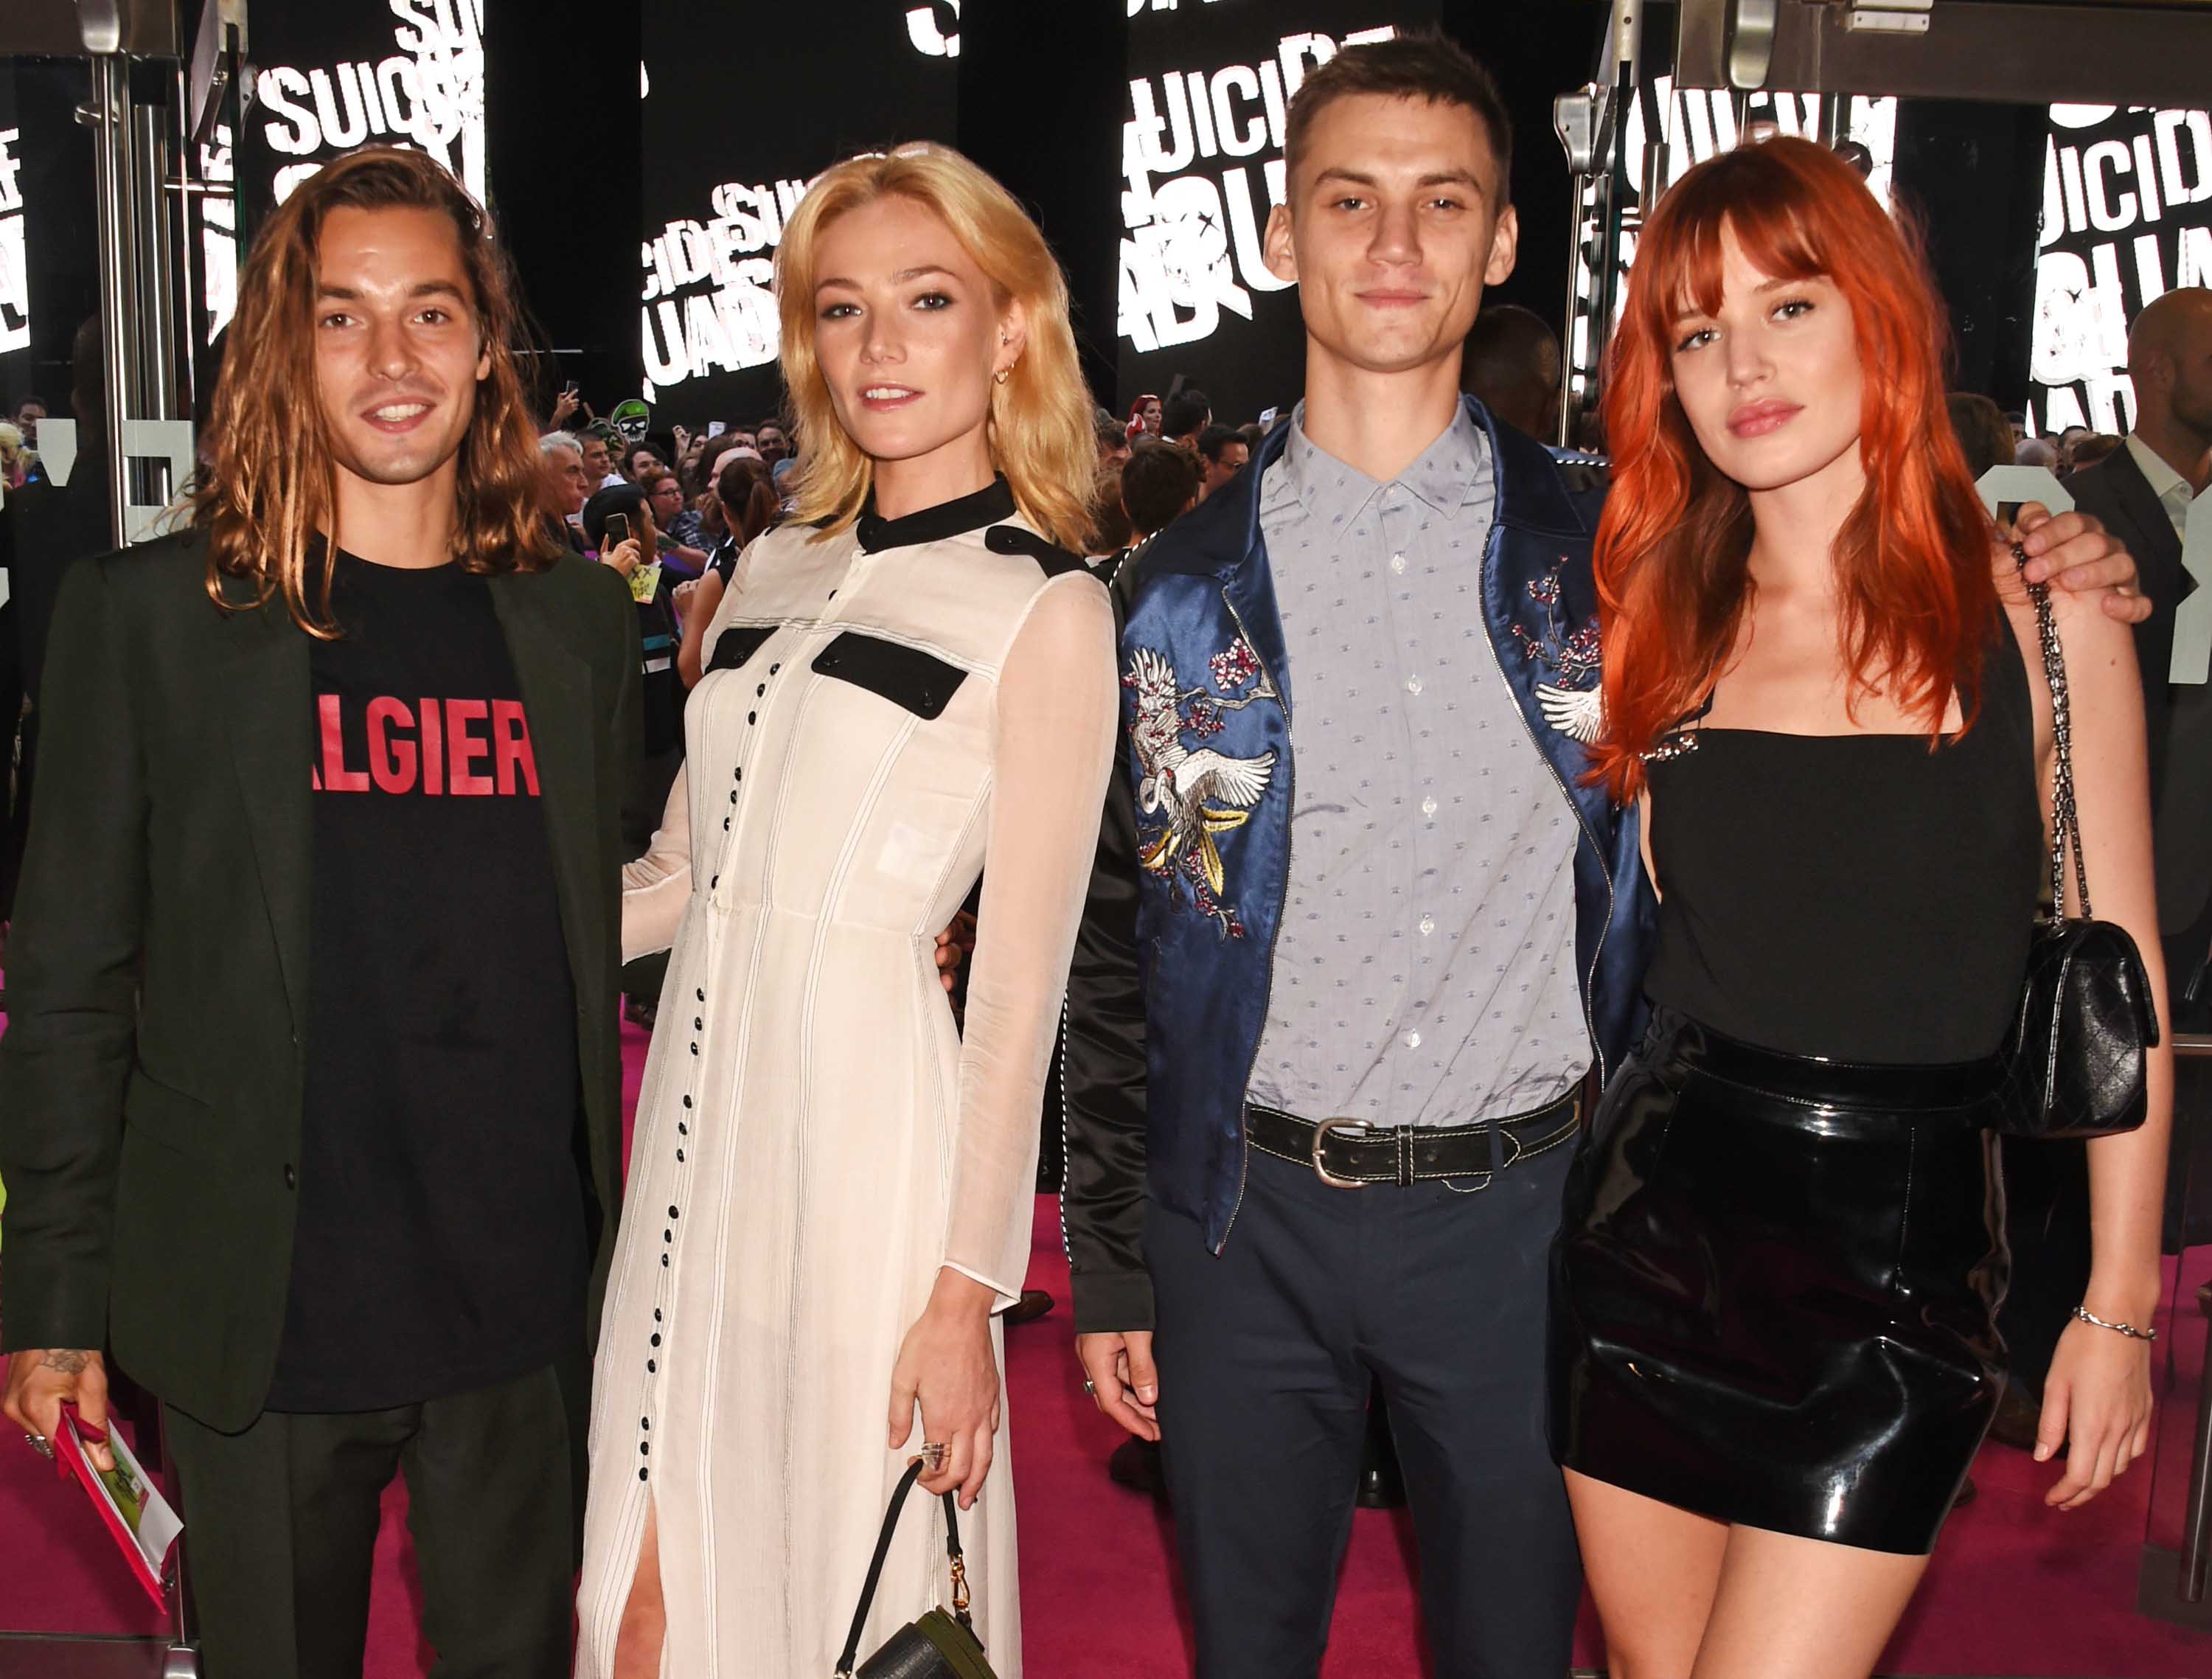 Georgia May Jagger attends the European premiere of Suicide Squad